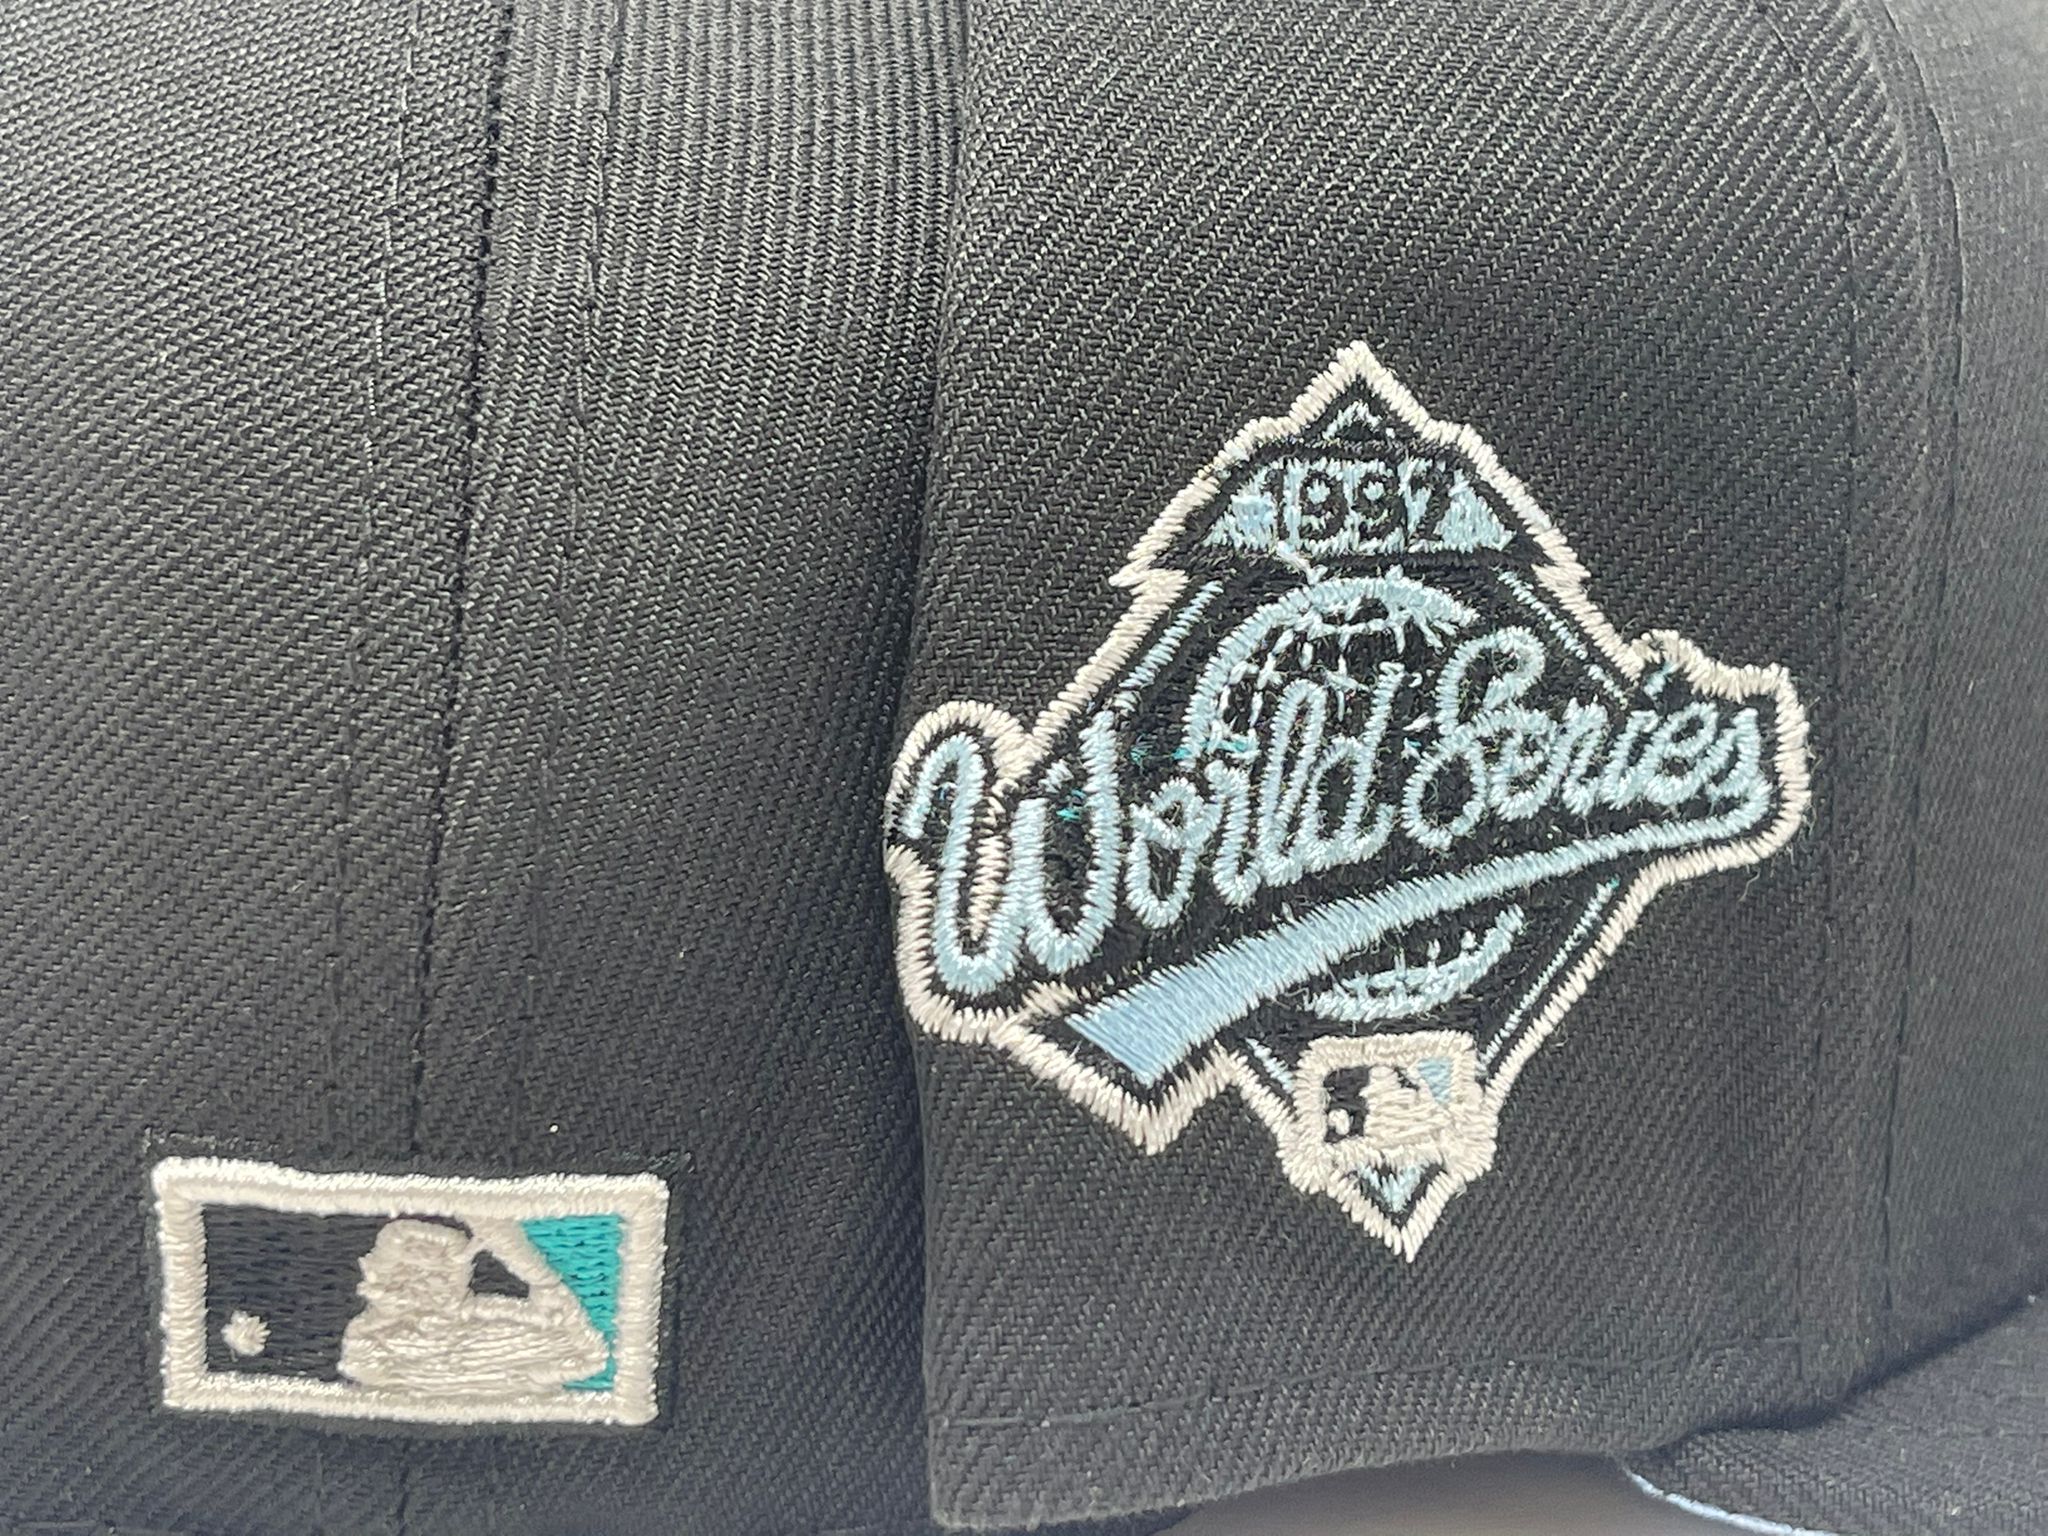 Florida Marlins 1997 World Series Patch New Era 59Fifty Fitted Hat (Bl –  ECAPCITY